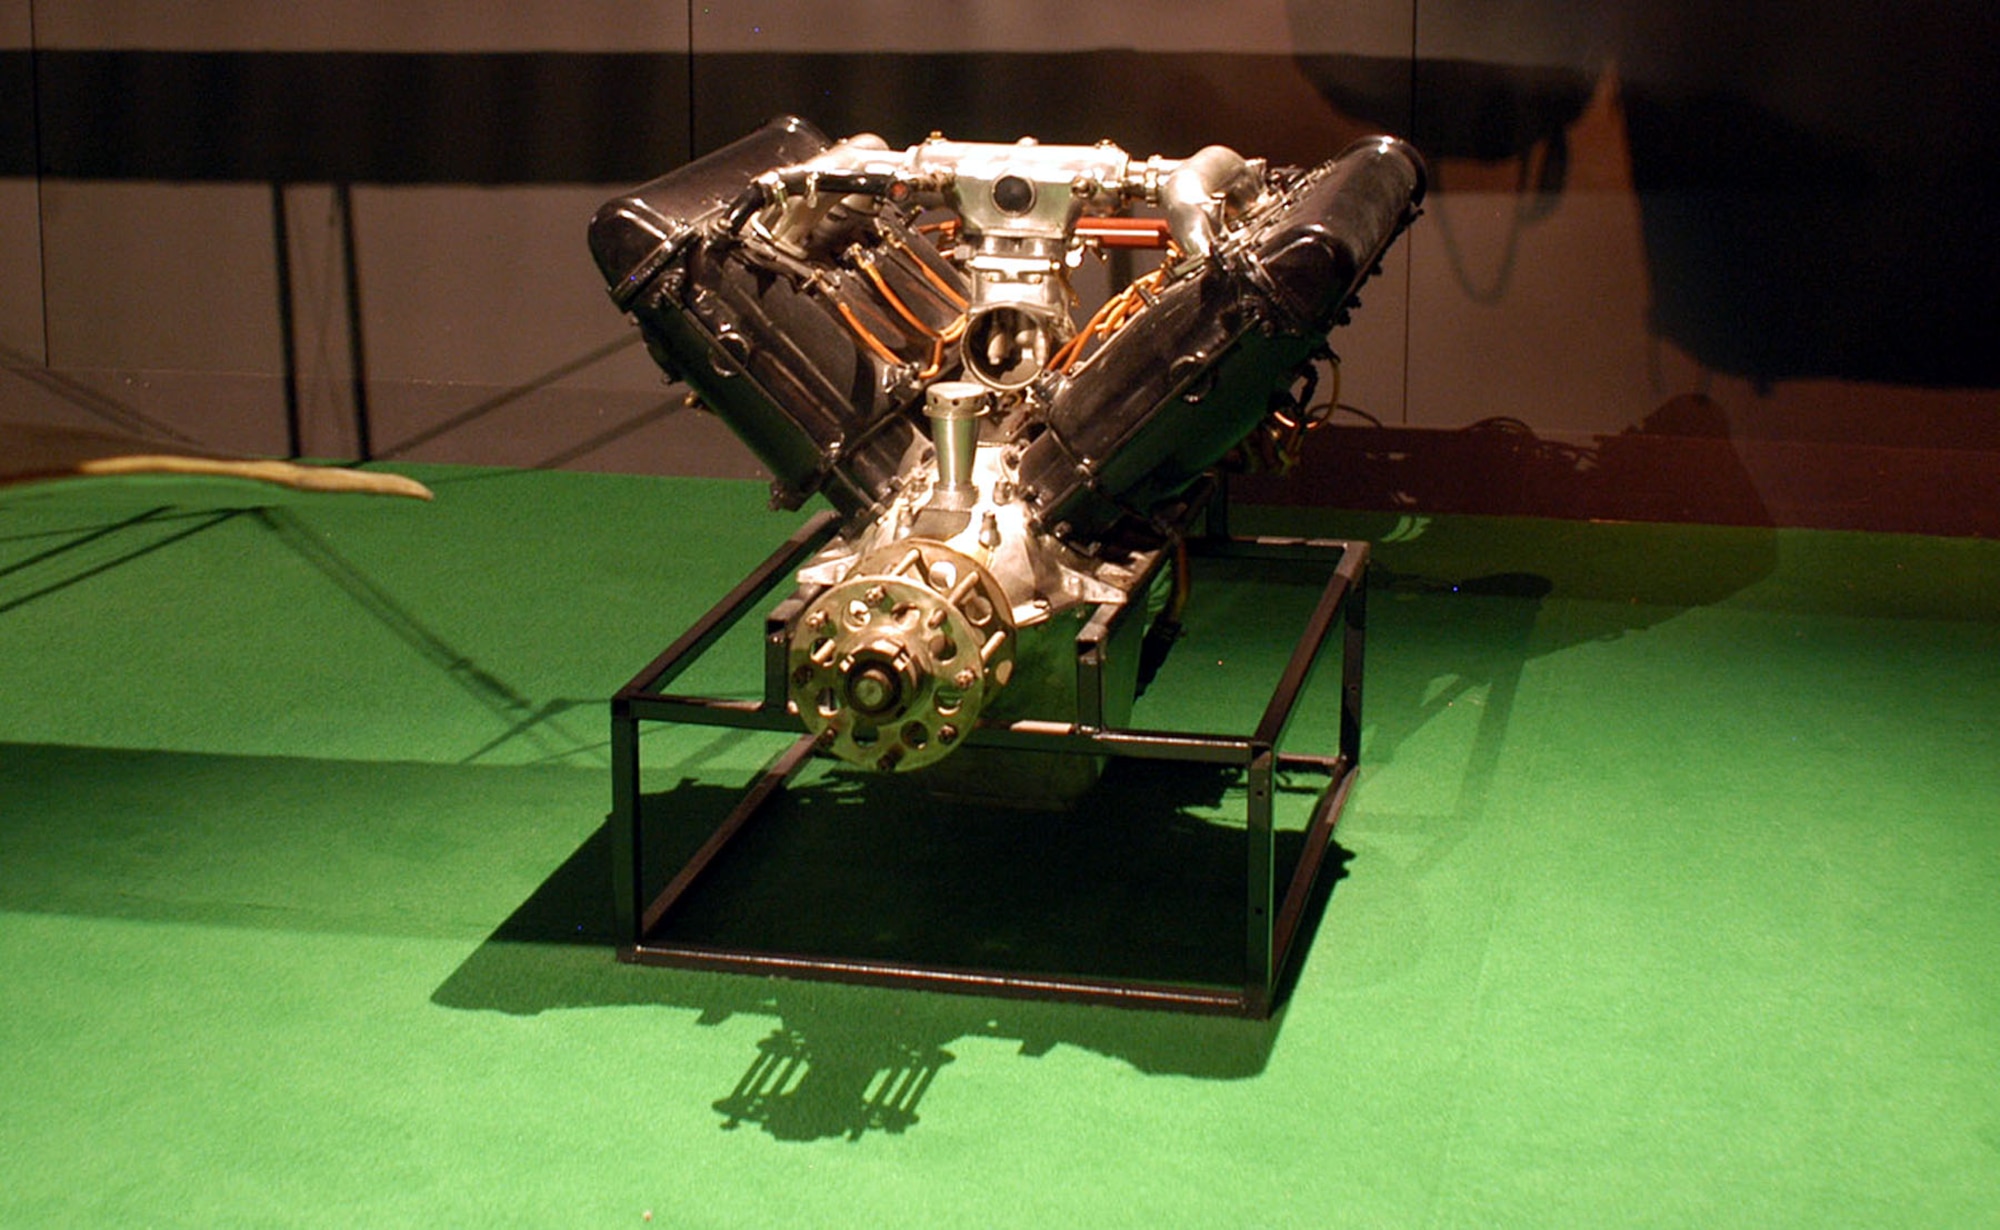 DAYTON, Ohio -- Hispano-Suiza 8BE engine on display in the Early Years Gallery at the National Museum of the United States Air Force. (U.S. Air Force photo)